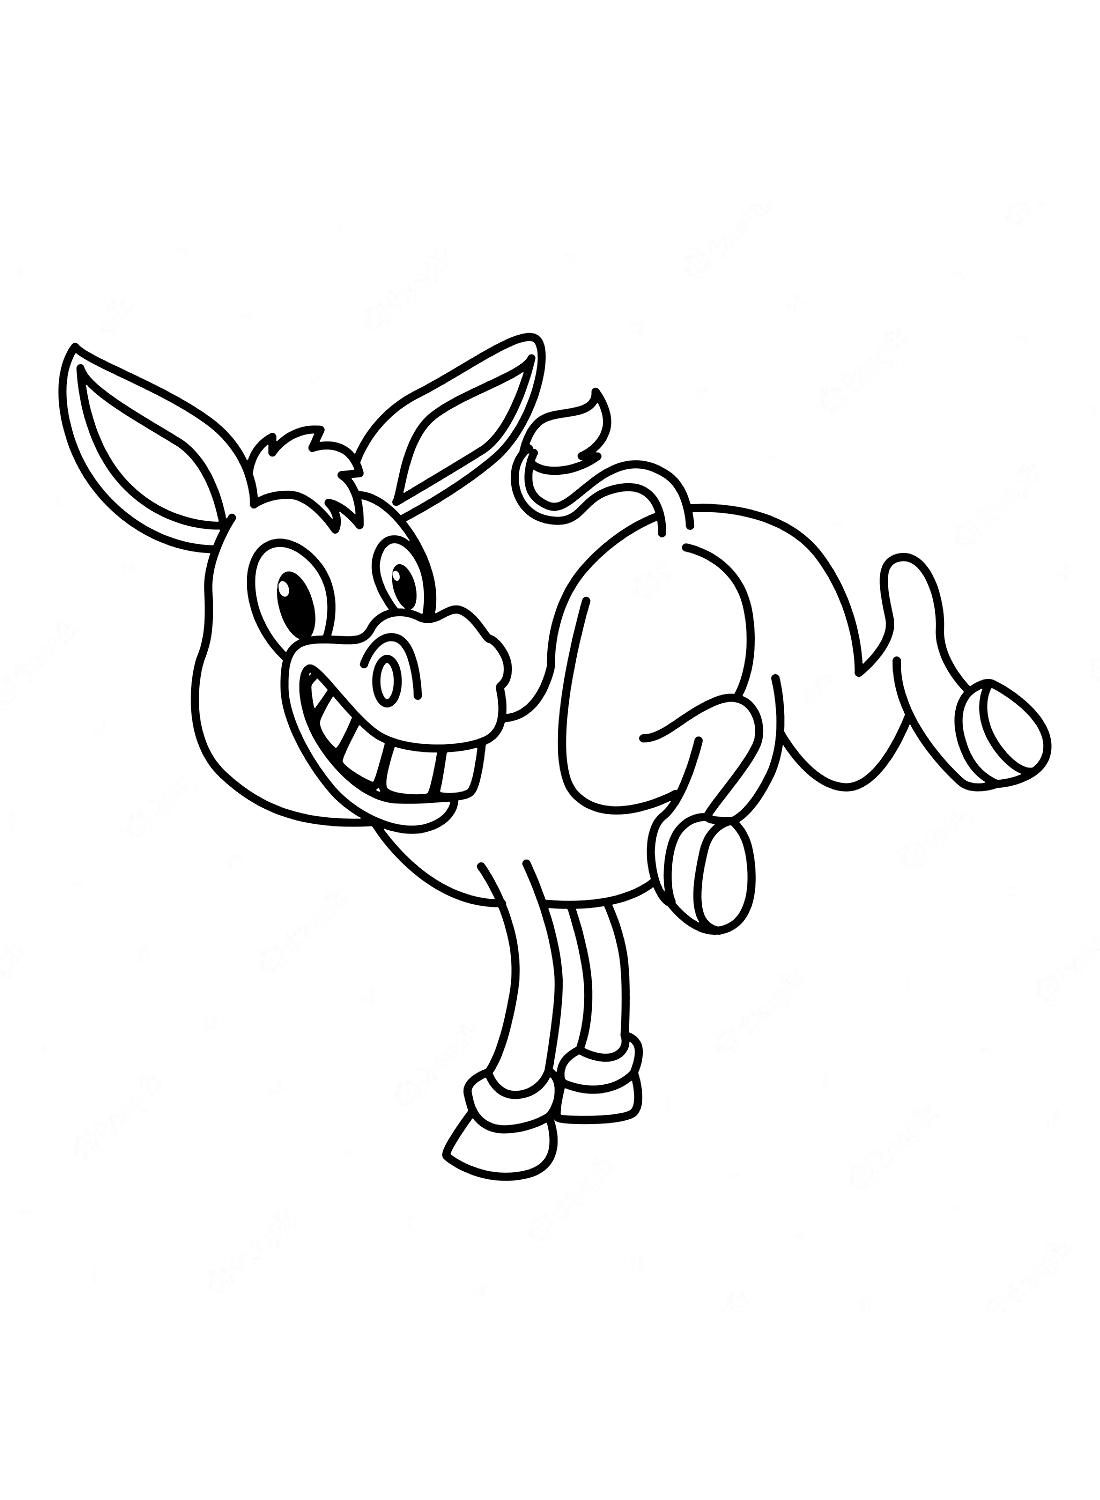 Jumping Donkey Coloring Pages